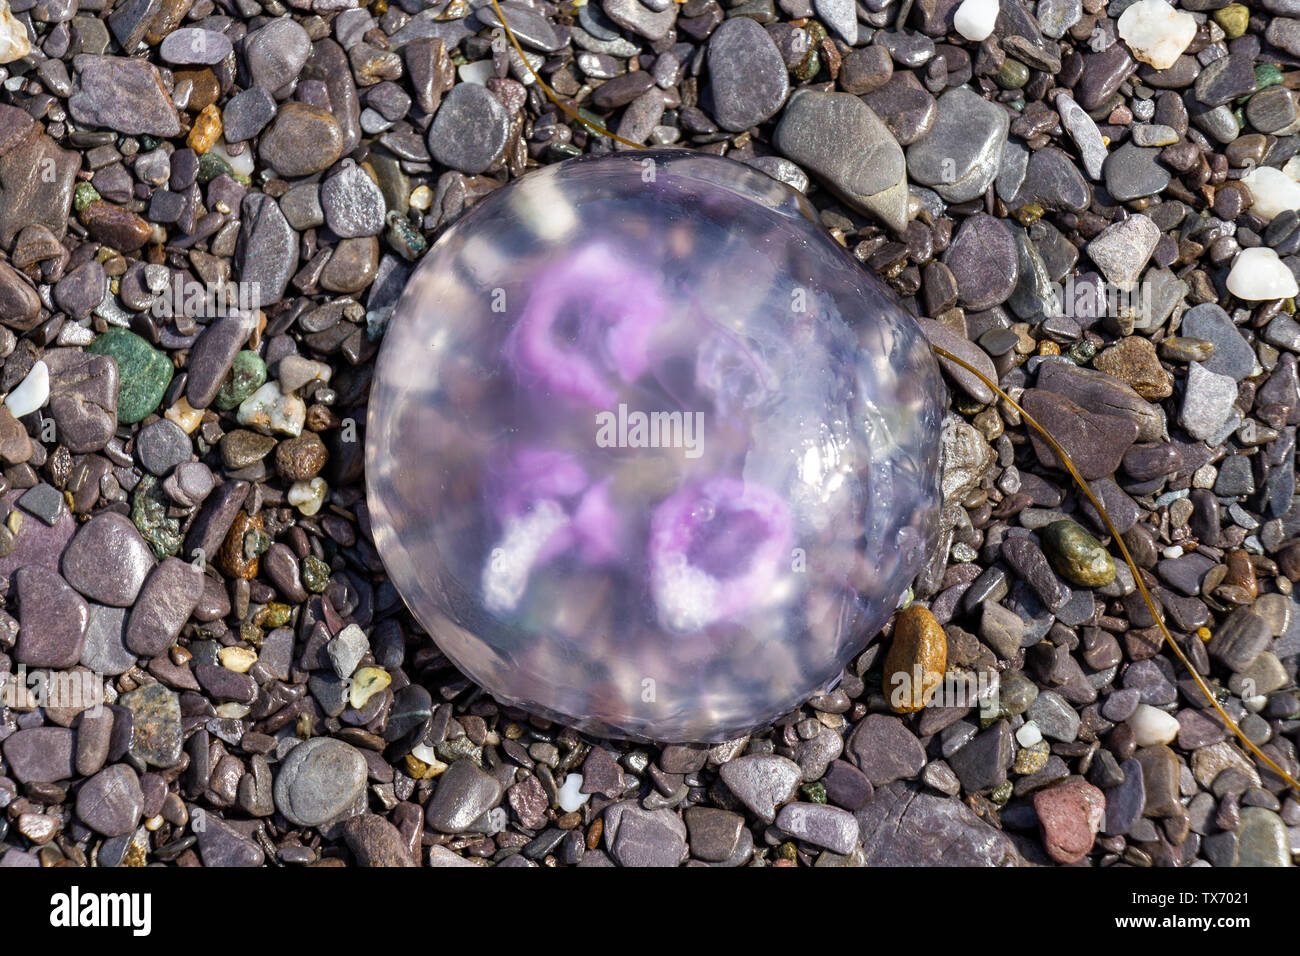 Castlehaven, West Cork, Ireland, 24th June 2019, The warming weather has brought swarms of Jellyfish ashore on the tide, they can still sting if the unwary foot stands on one.  Credit aphperspective/ Alamy Live News Stock Photo